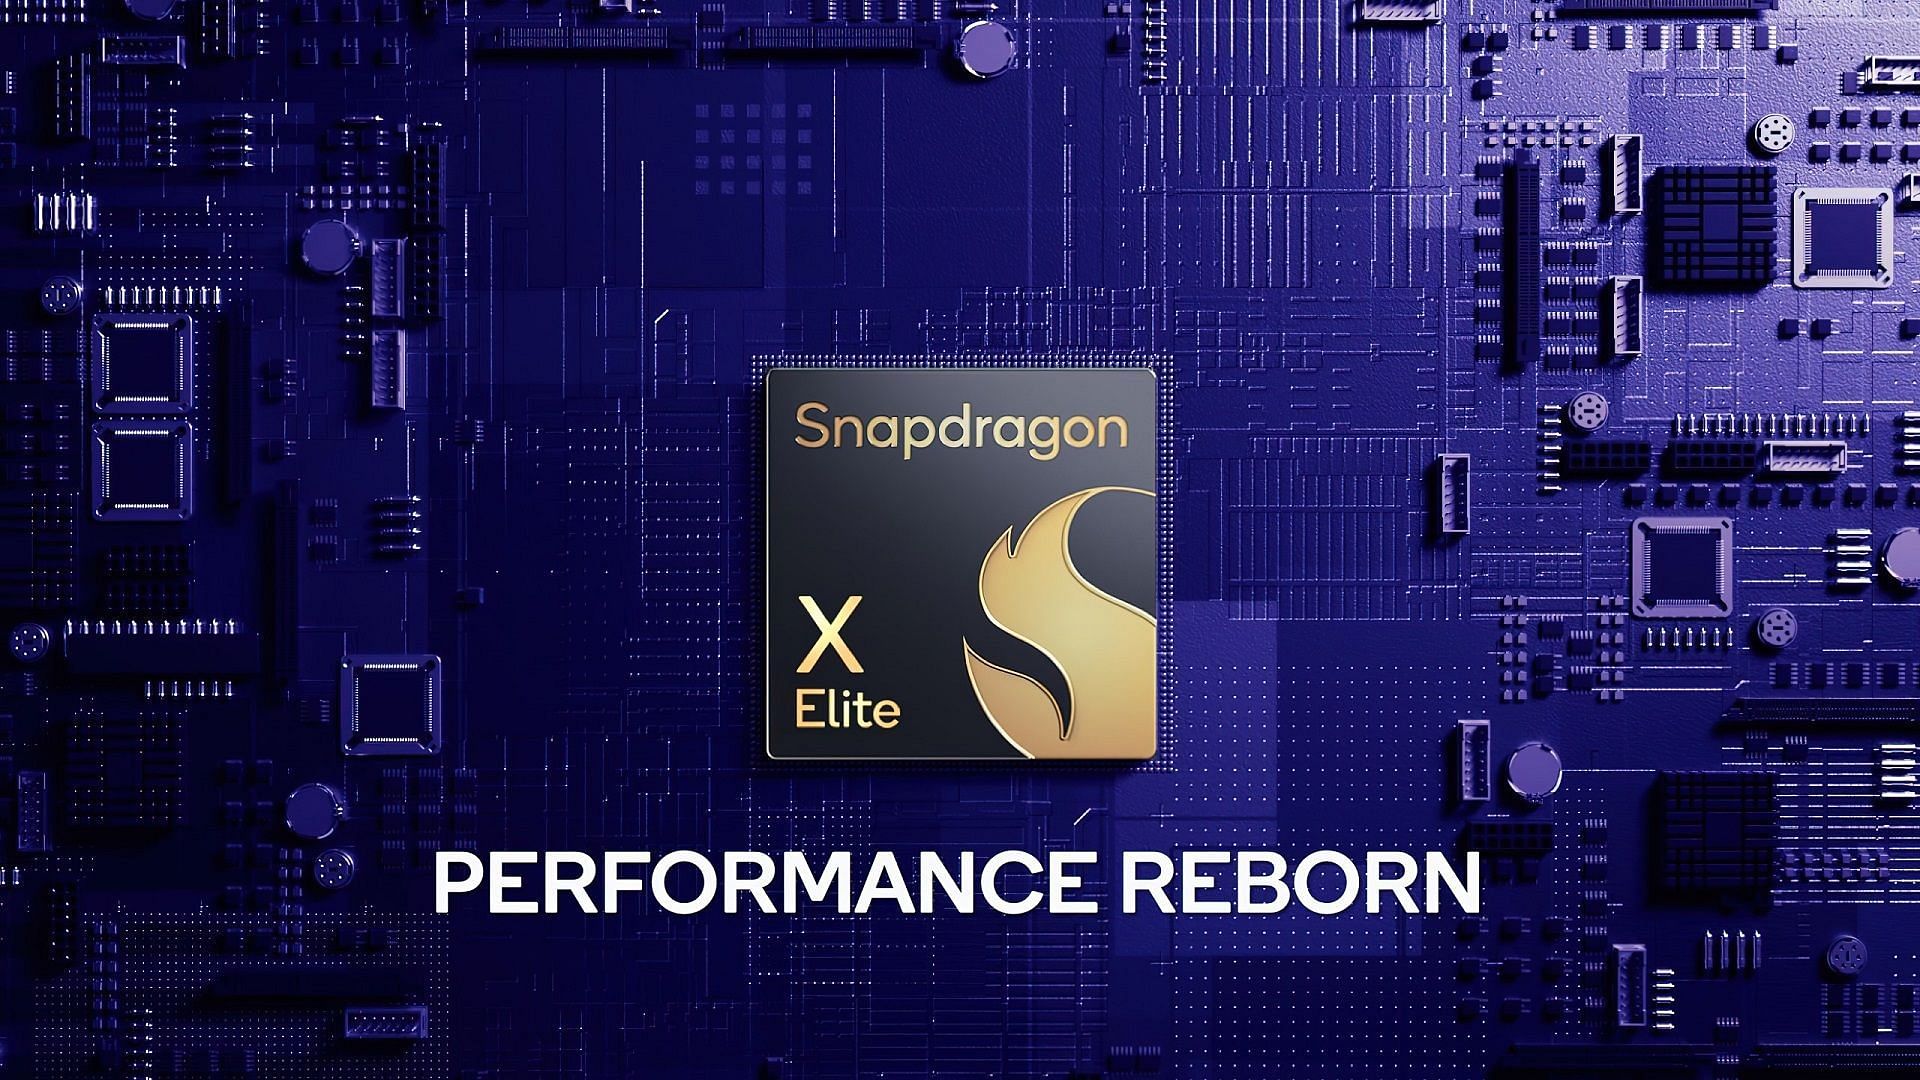 Picture of the Snapdragon X Elite